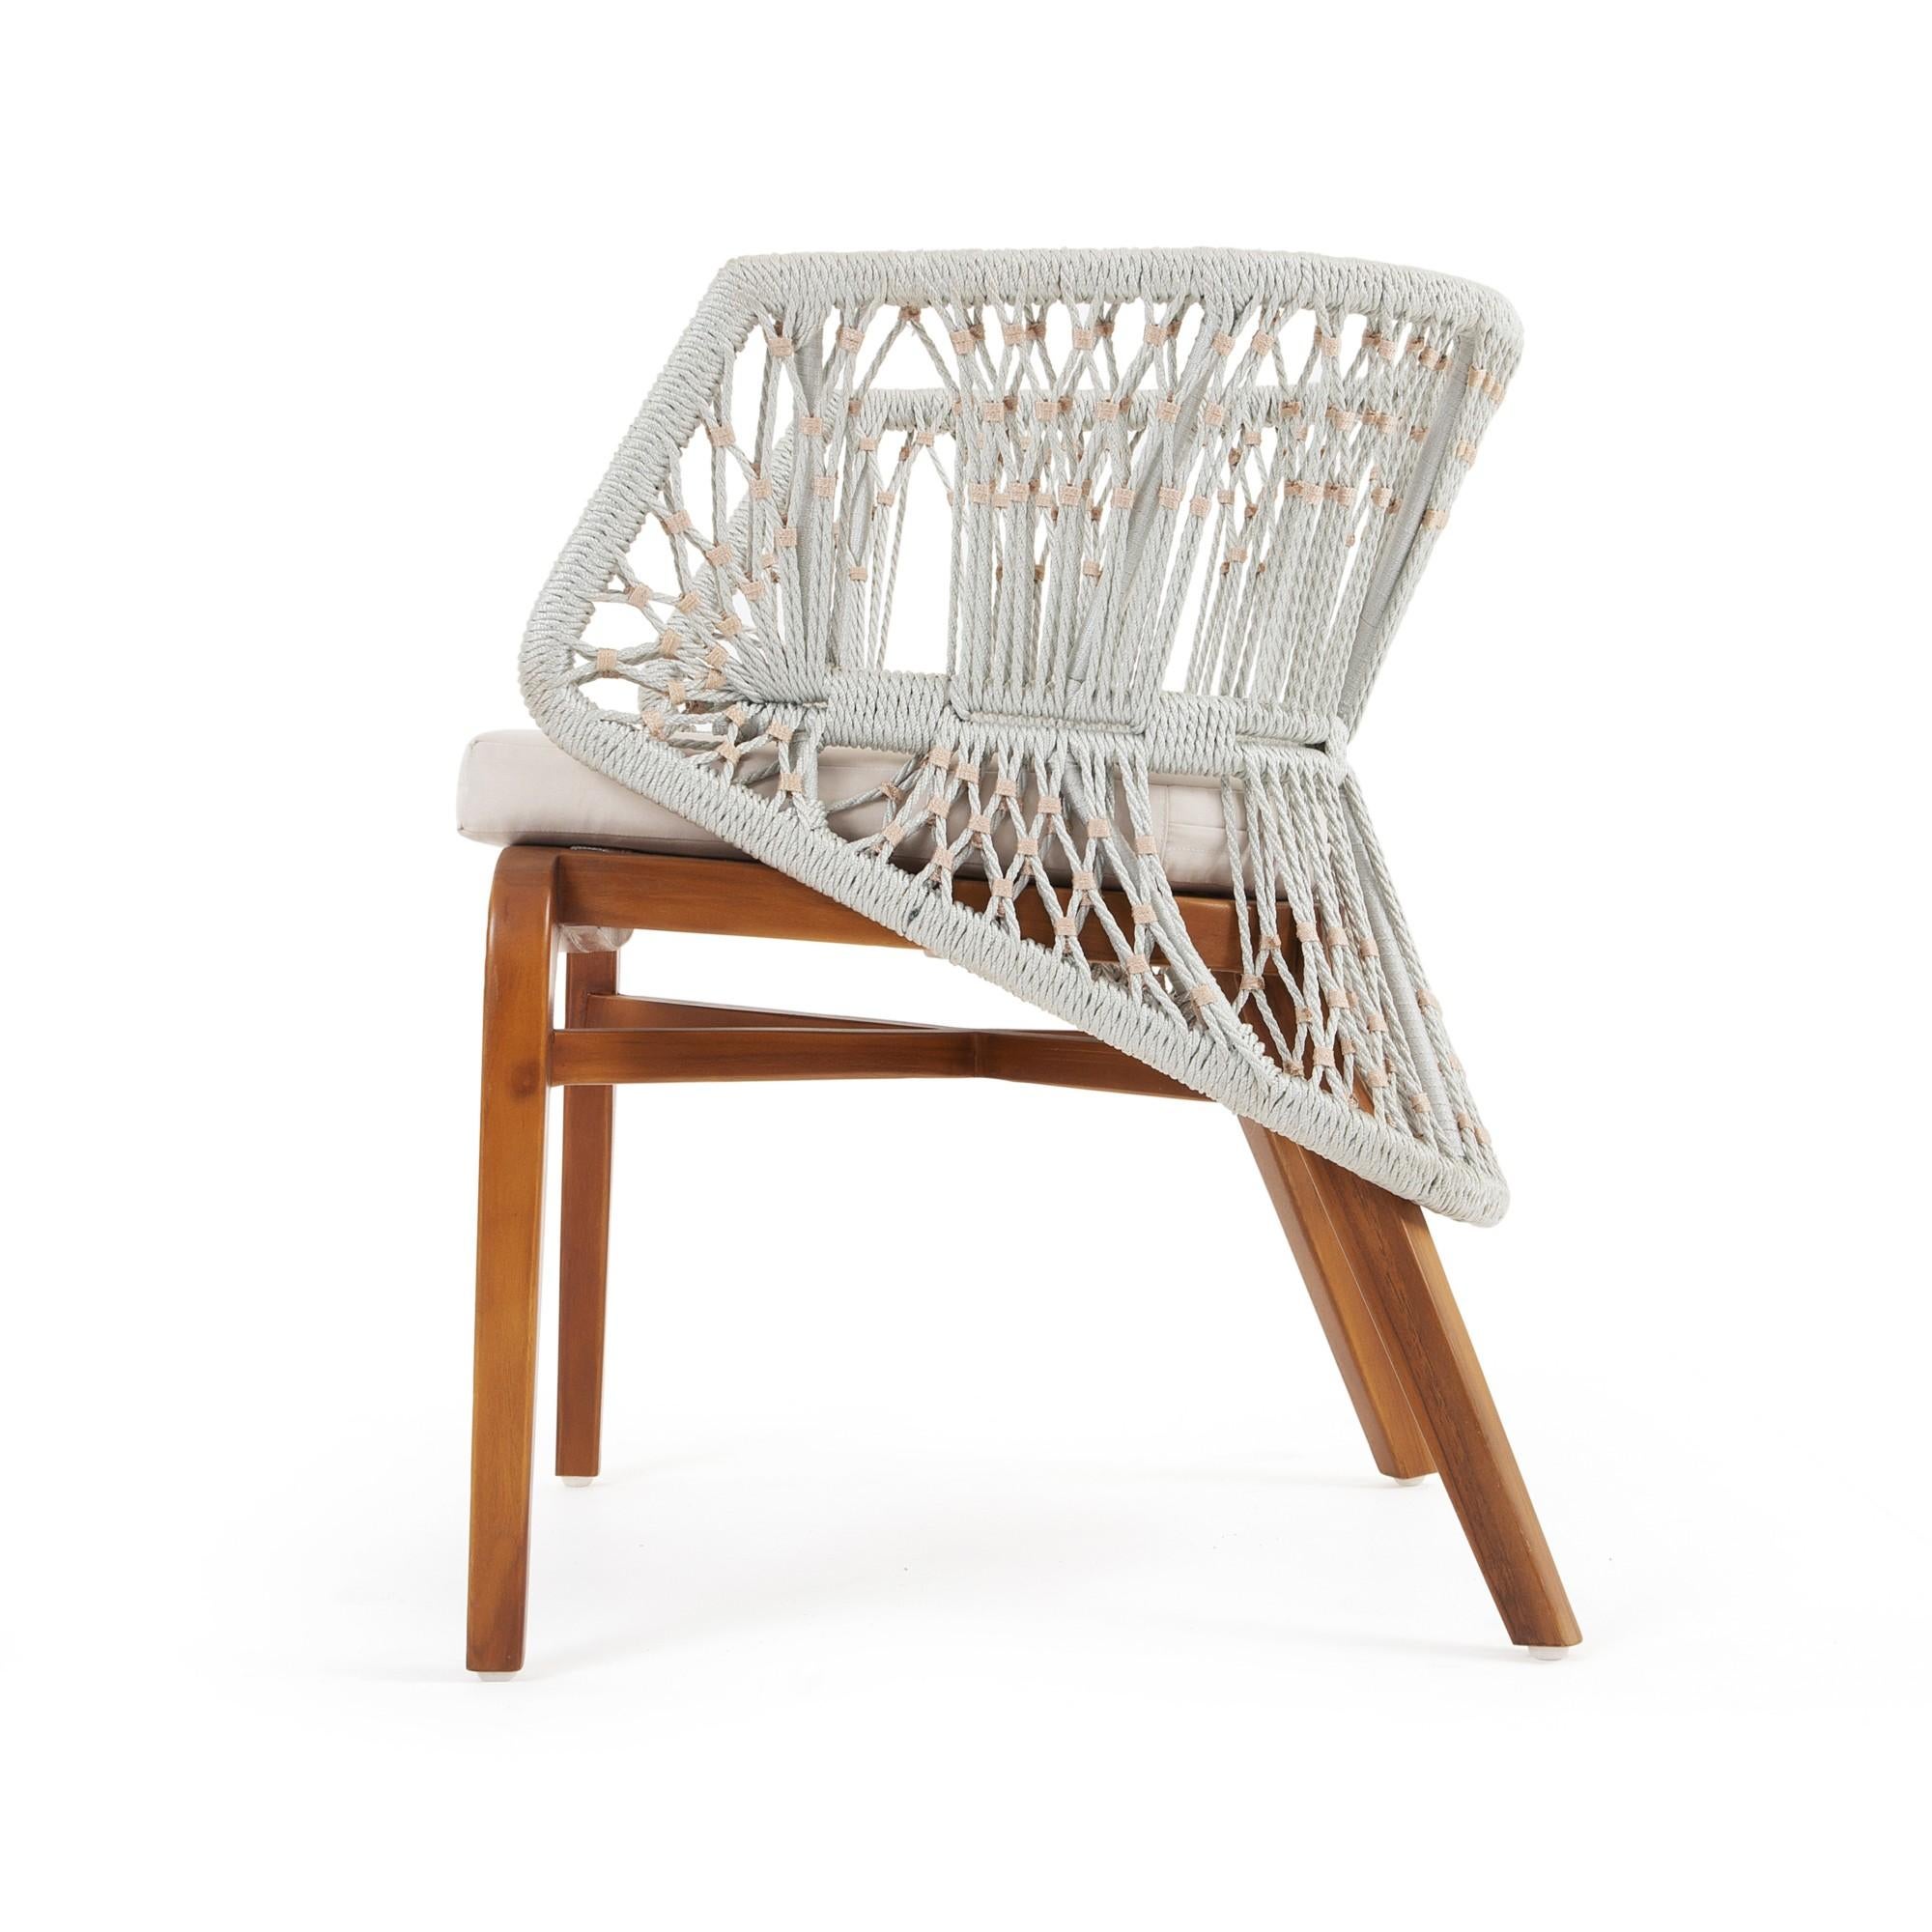 Contemporary Handwoven Rope Outdoor Chairs In Solid Teak (Set Of 6) For Sale